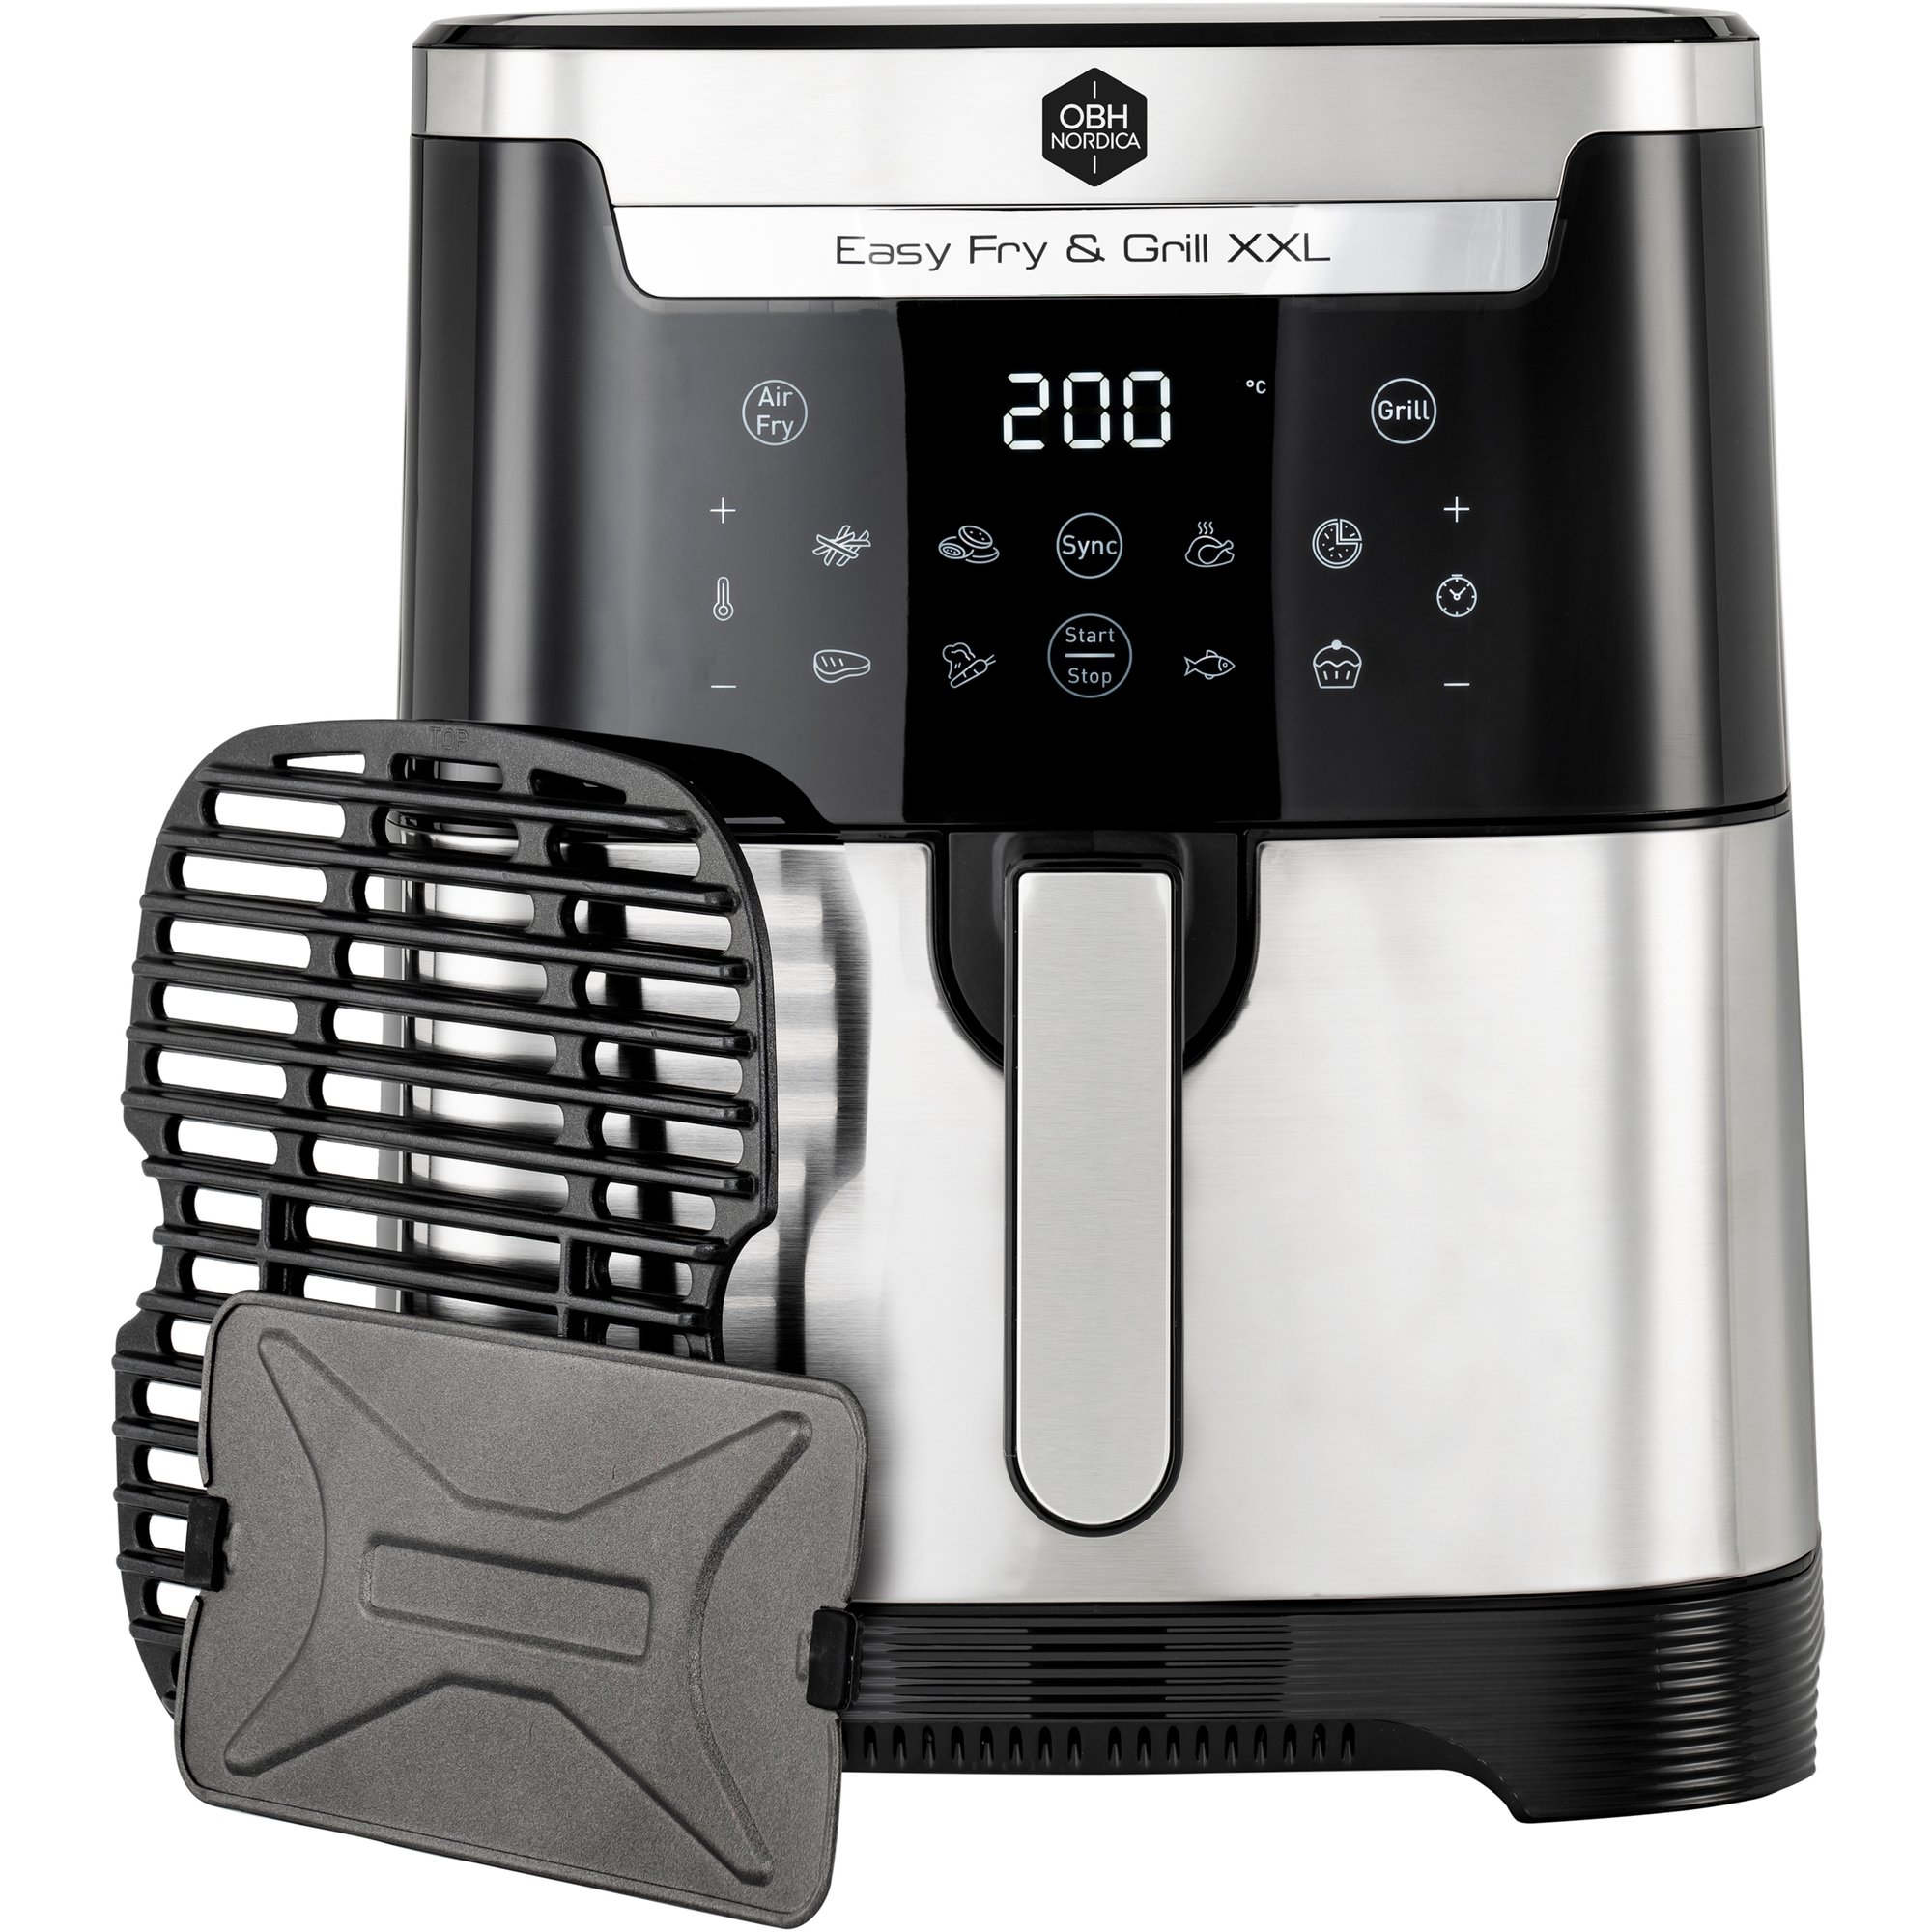 OBH Nordica Easy Fry & Grill XXL 2-in-1 airfryer 6,5 liter